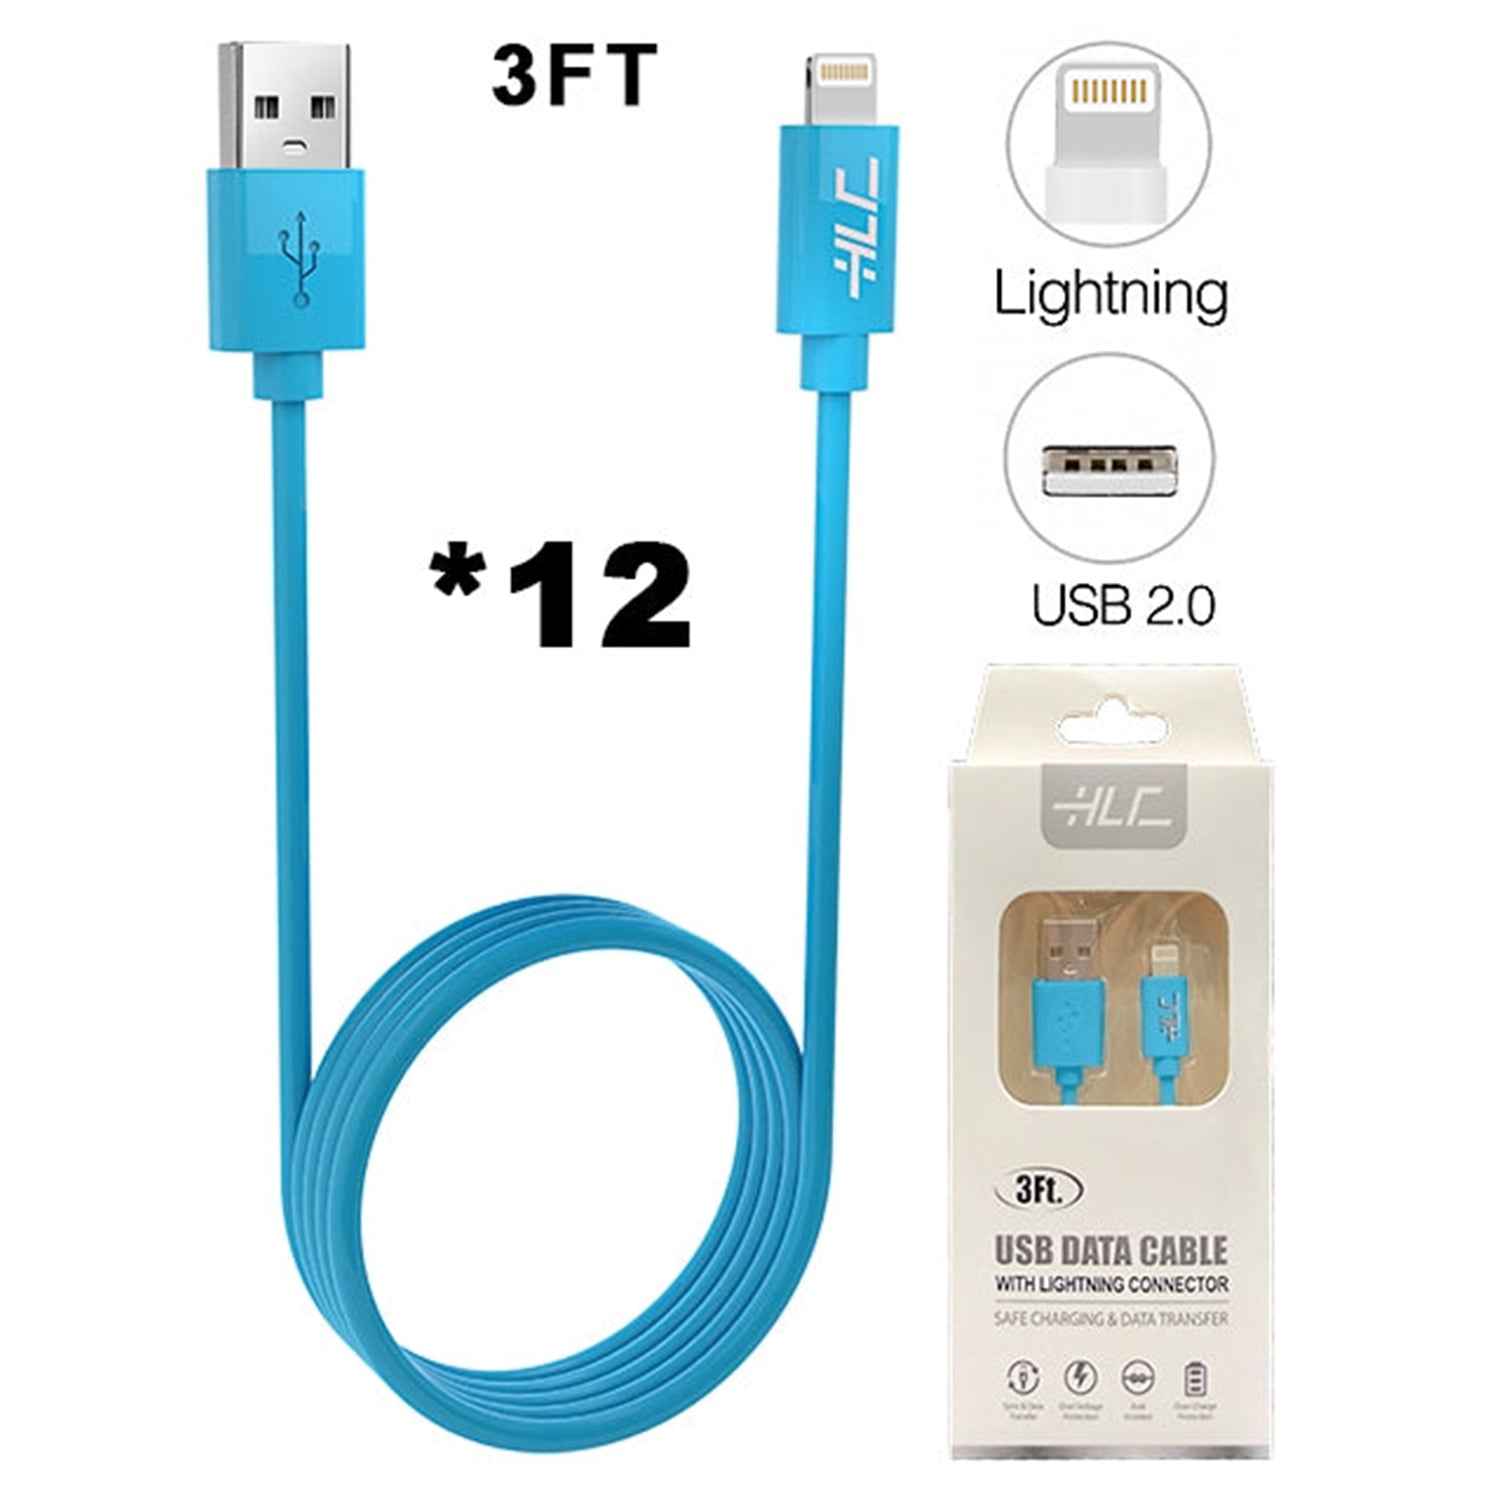 A Dozen of Lightning USB Cable for iPhone 11/11 Pro /11 Pro Max/ Xs Max/ X / XS/ 8 / 7 (3FT)